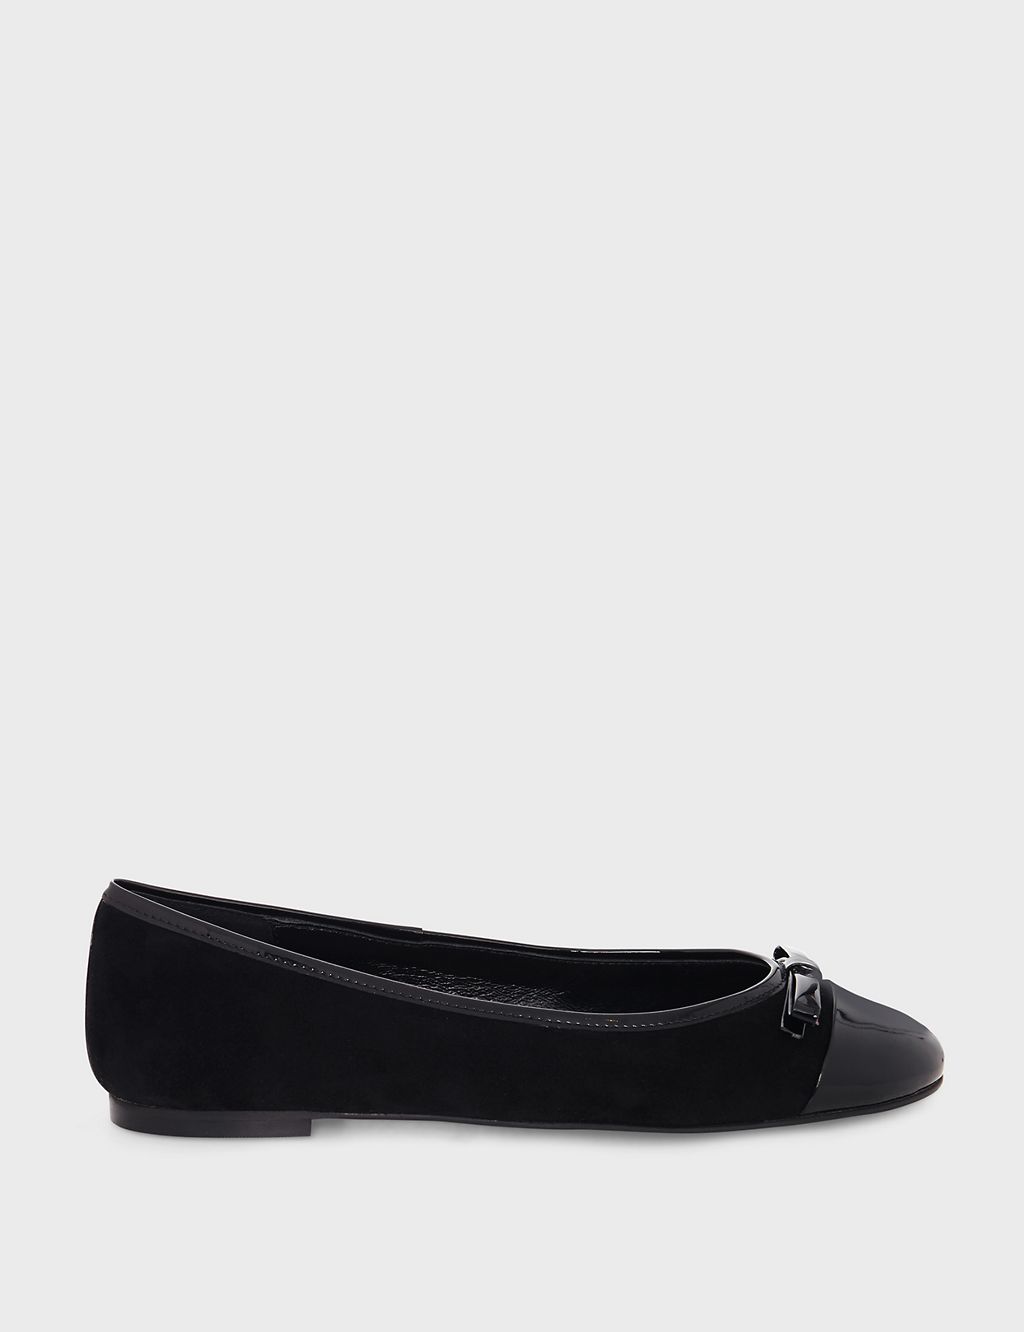 Leather Bow Slip On Flat Ballet Pumps 1 of 6